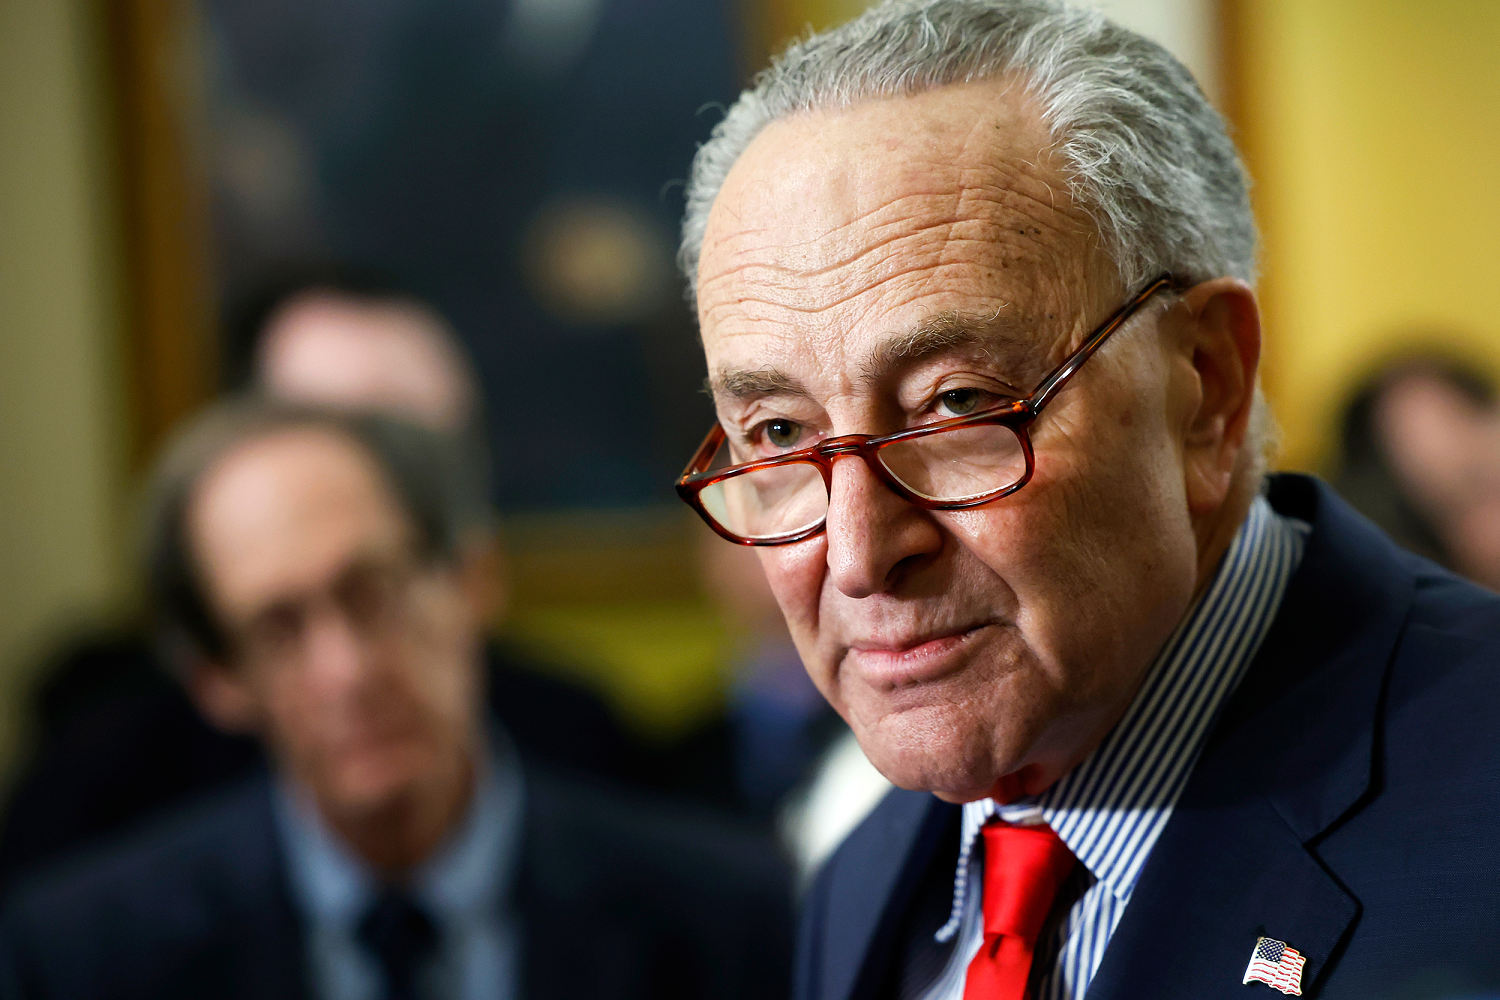 Chuck Schumer rolls out 'No Kings Act' to eliminate presidential immunity